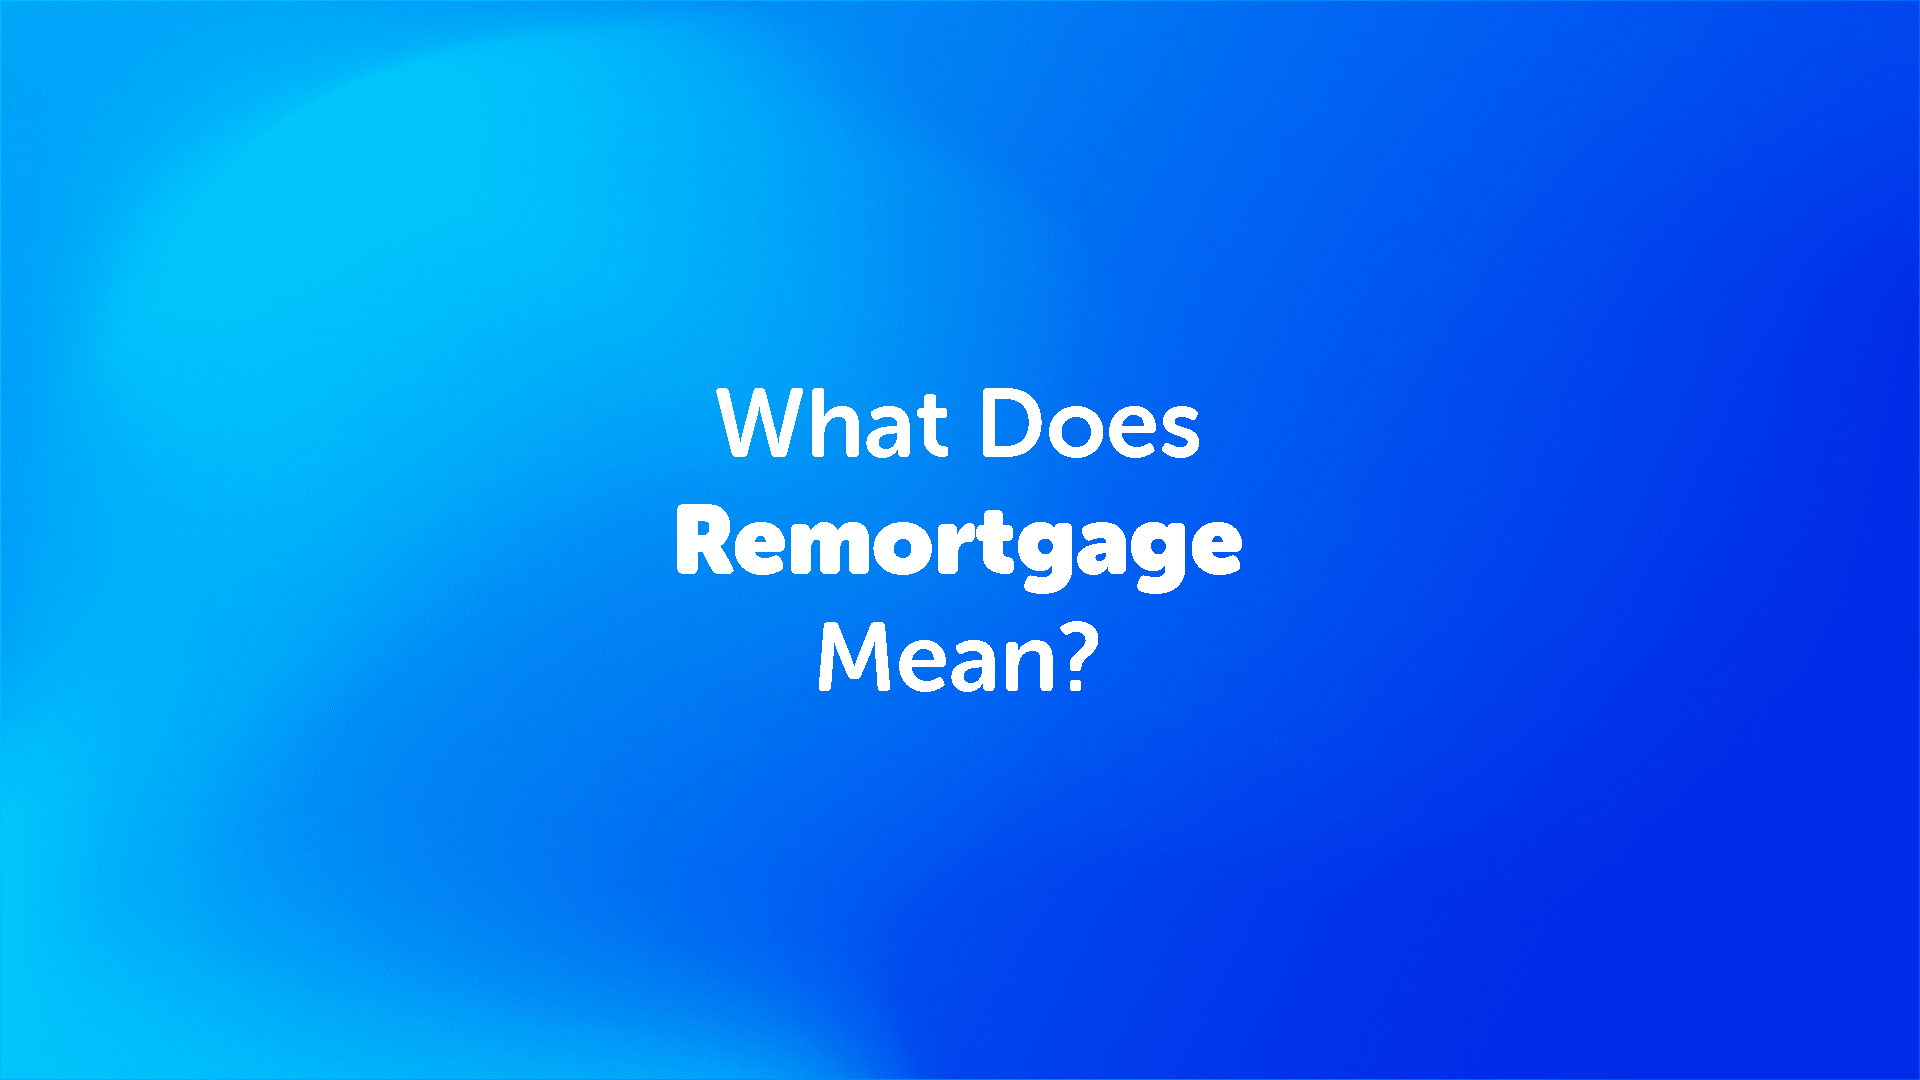 What Does Remortgage Mean?